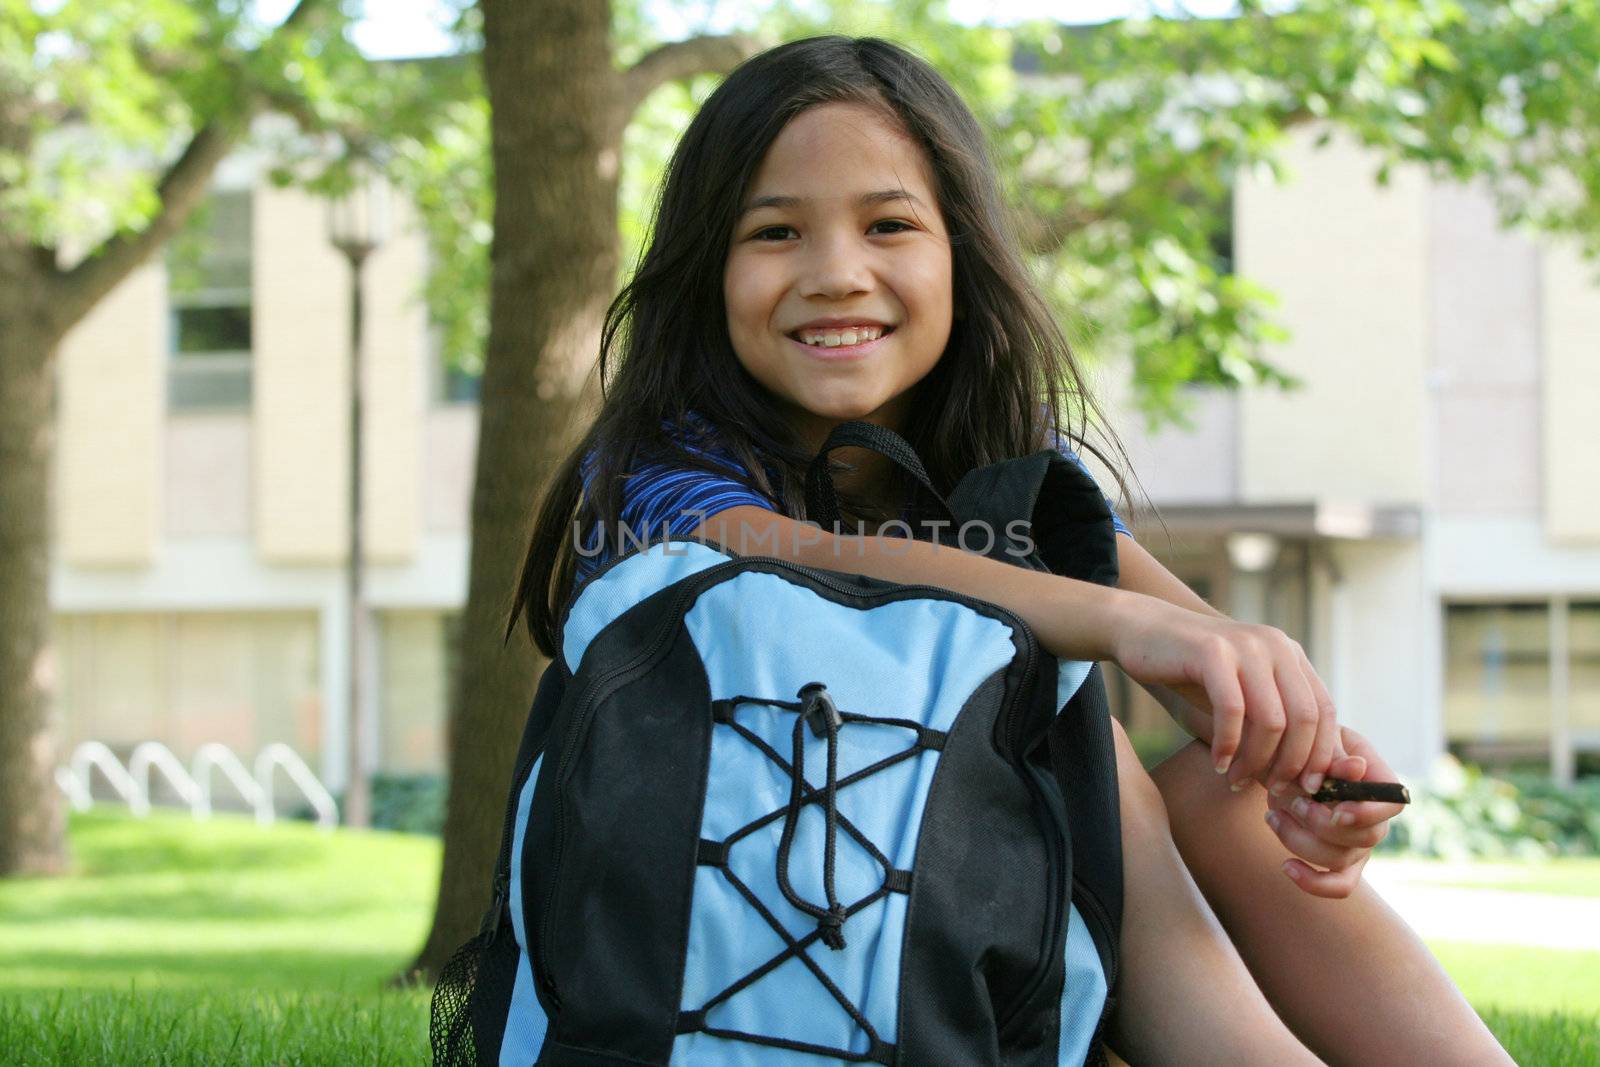 Eight year old girl excited about first day of school